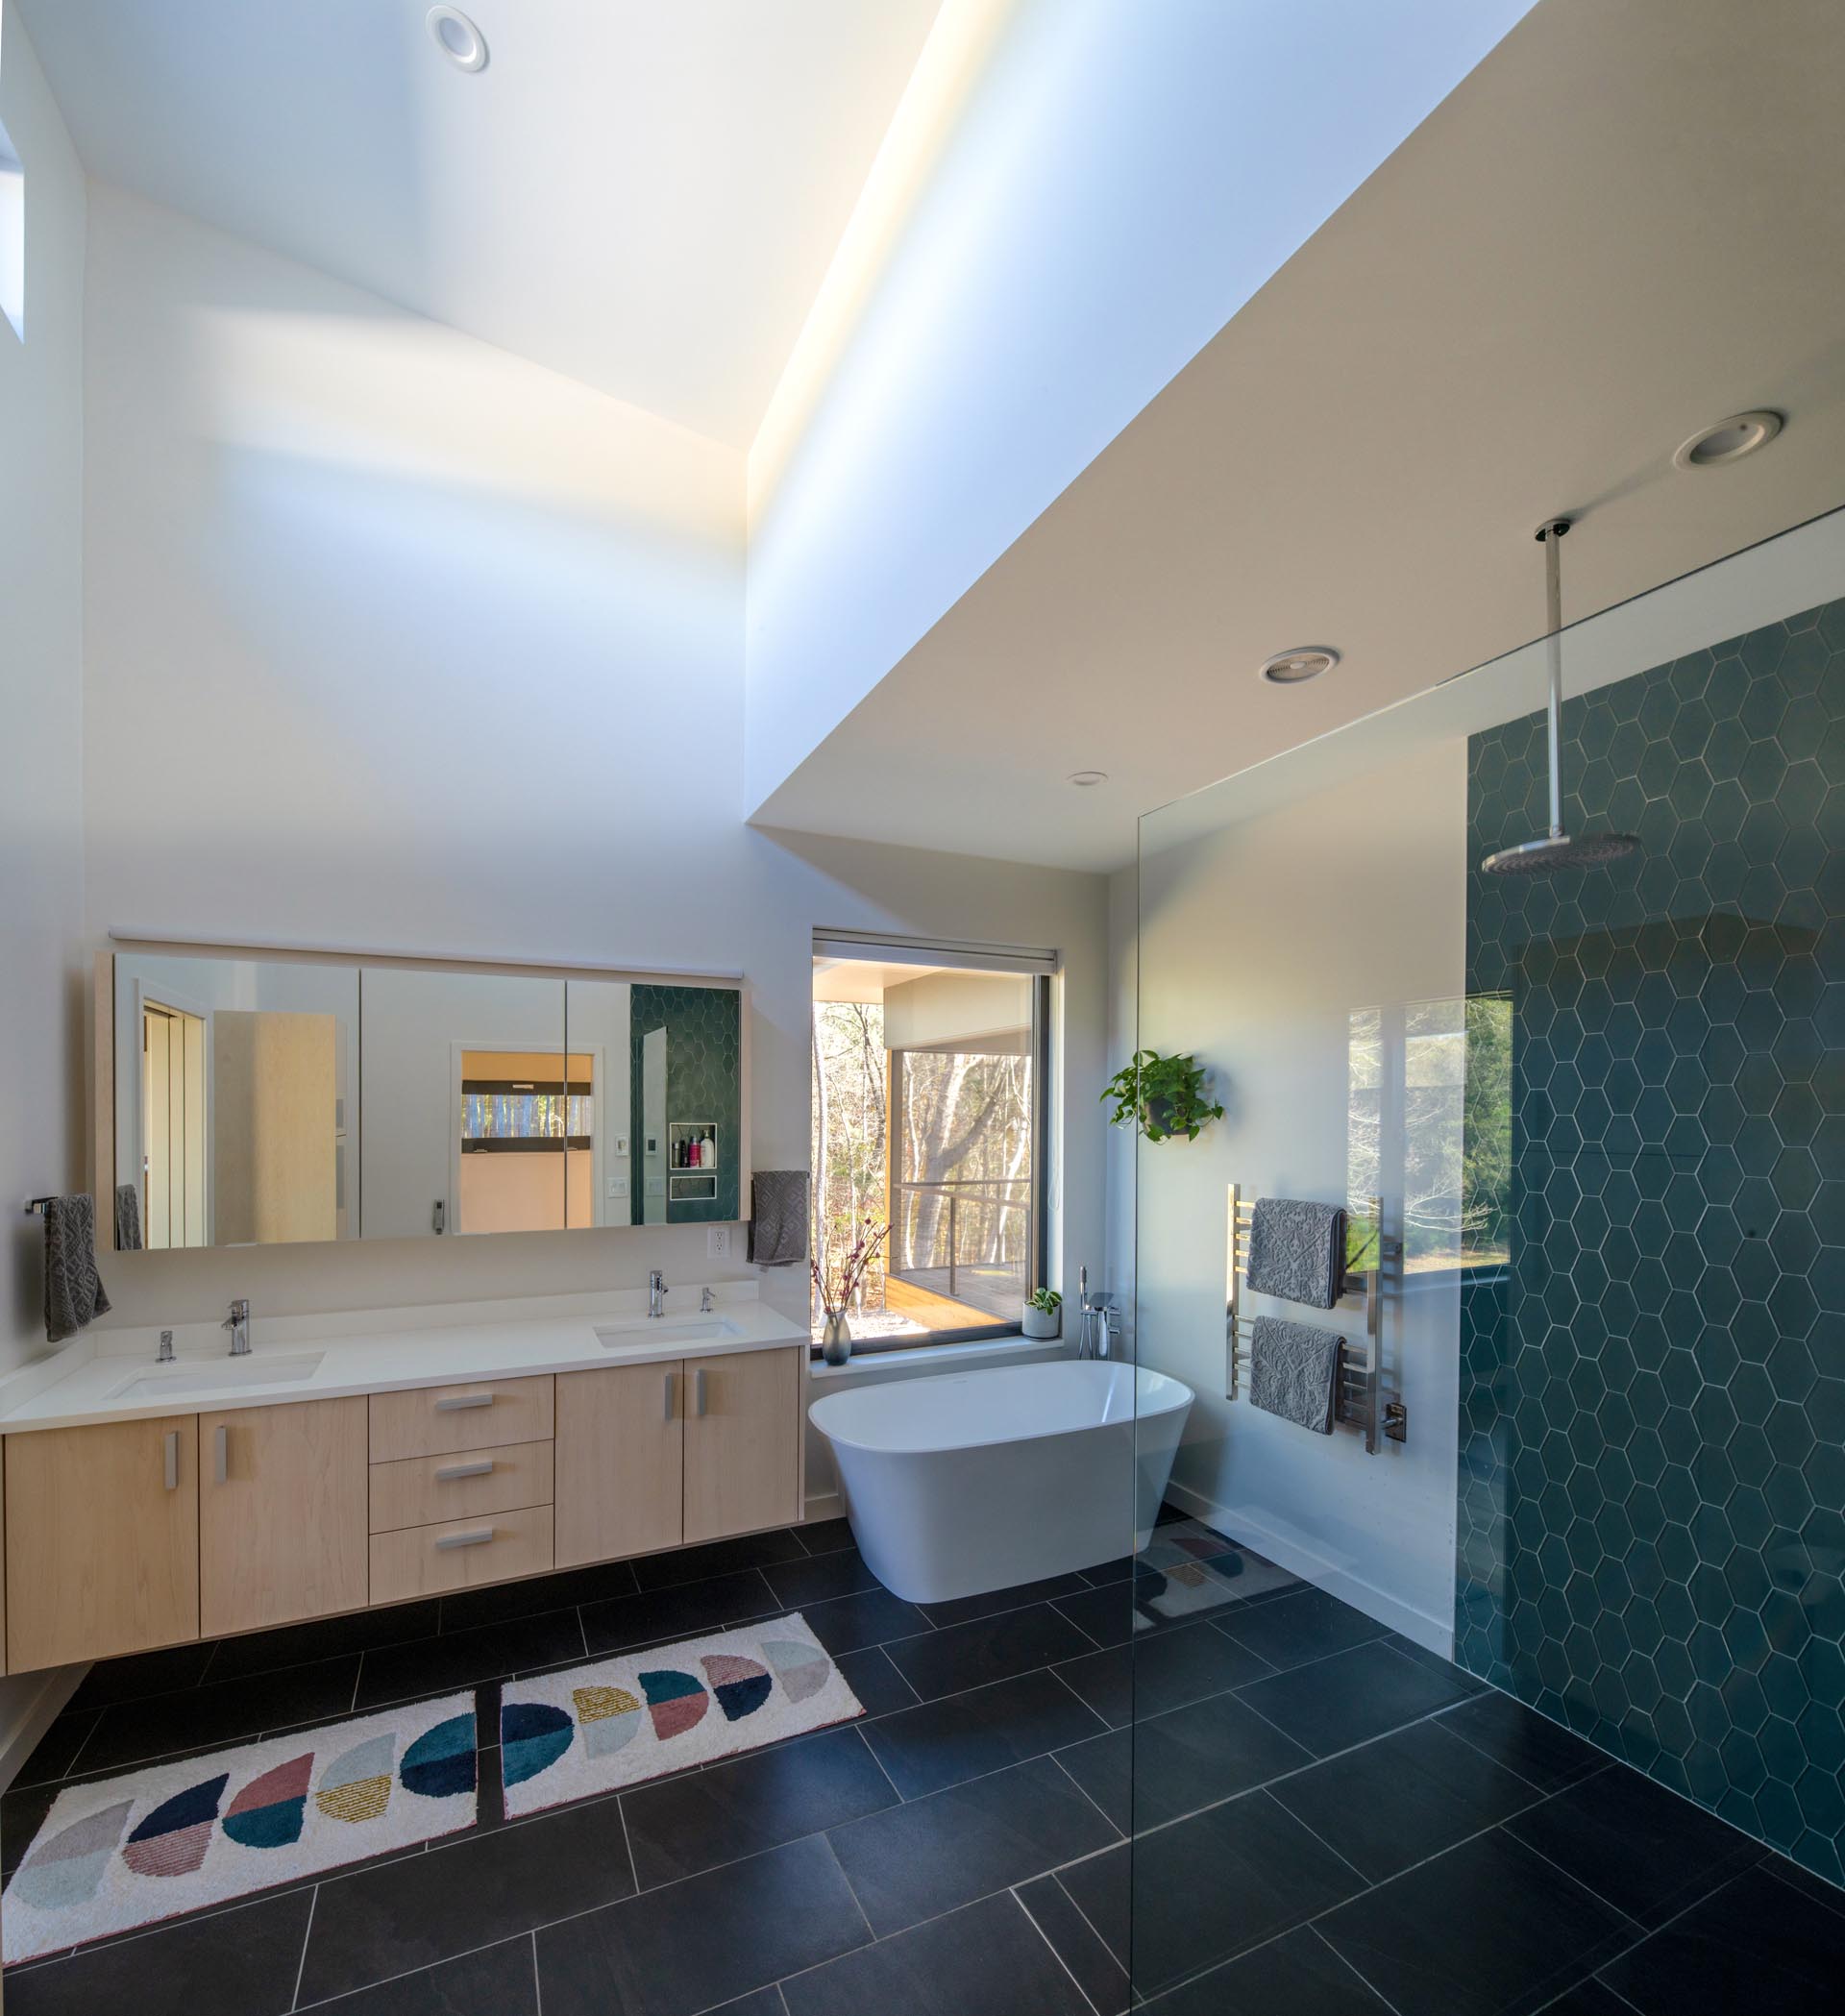 This spa-like master bathroom has high ceiling, black floor tiles, a dual sink vanity, a deep soaking tub, and a shower with a hexagonal tile accent wall.